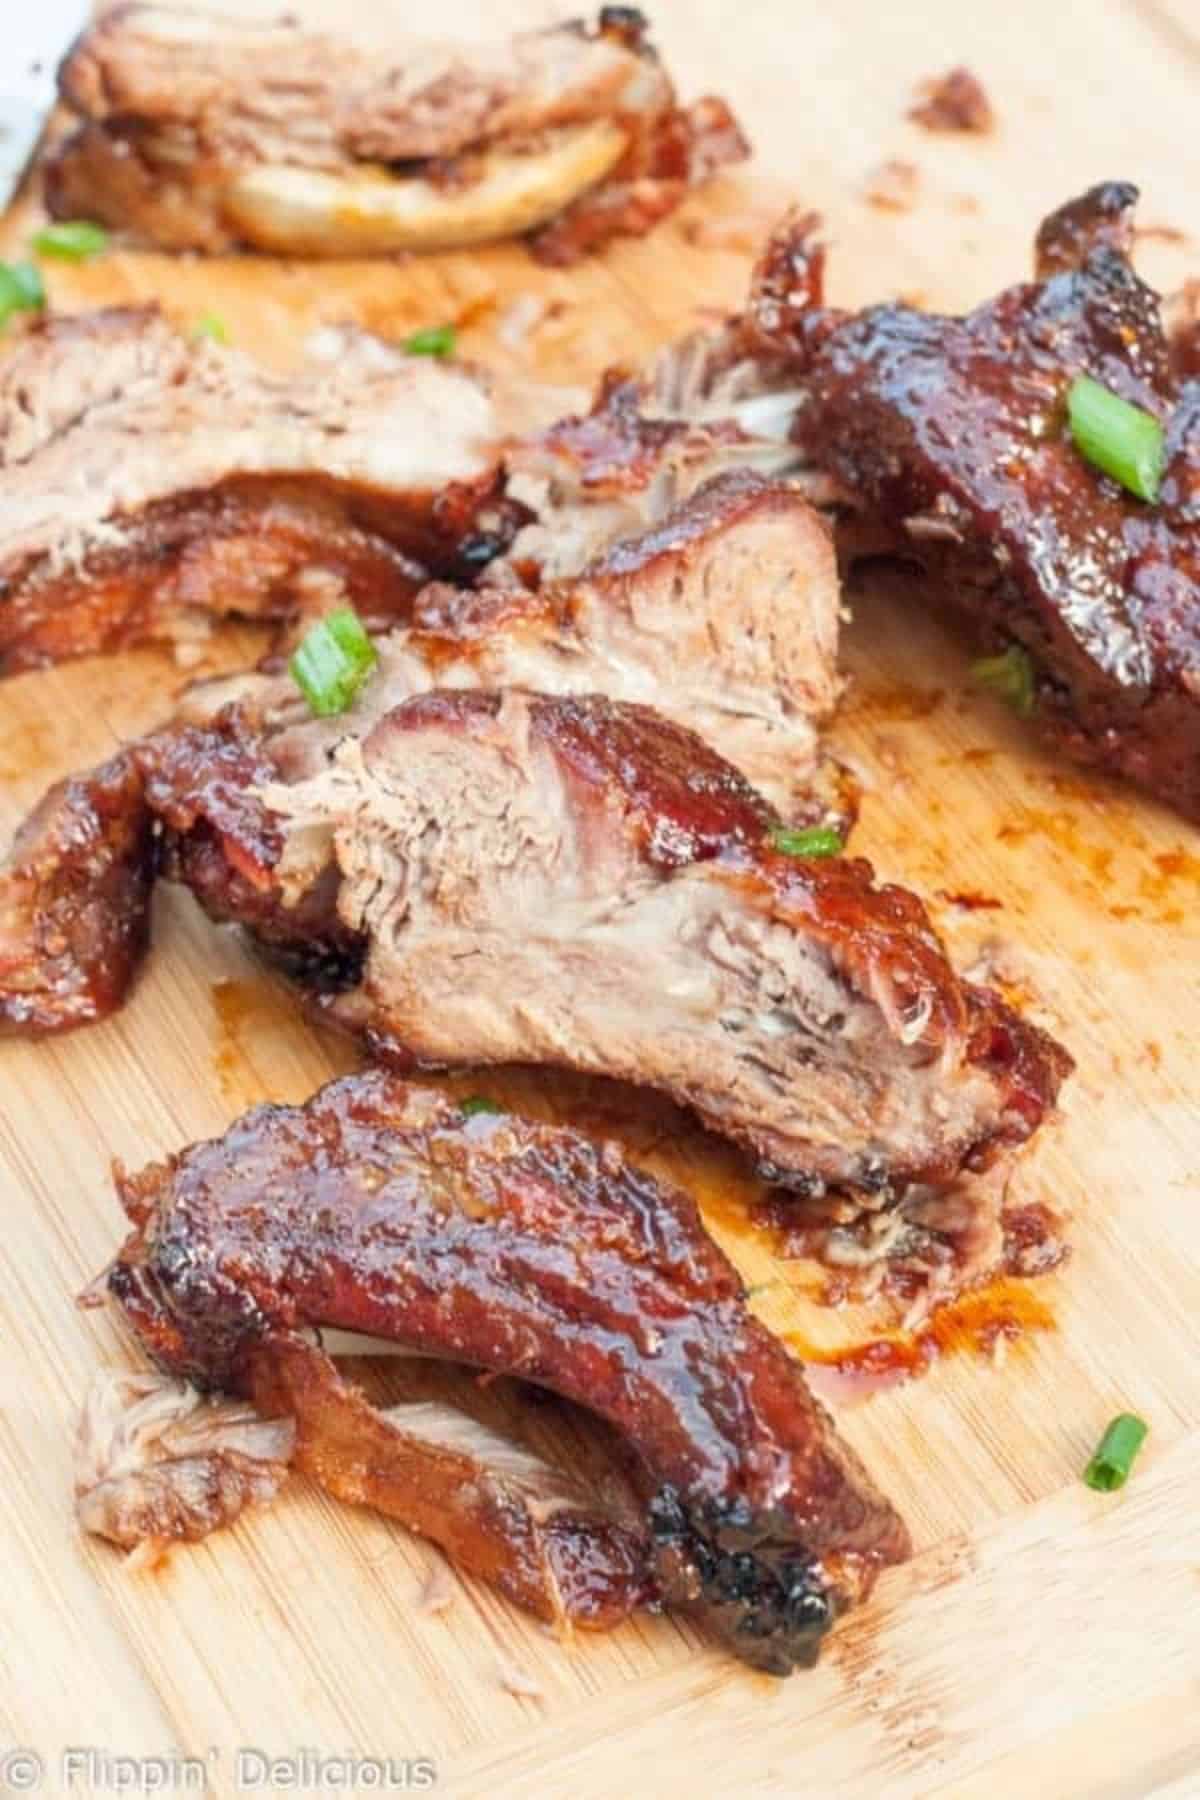 Juicy Sticky Asian Ribs on a wooden cutting board.